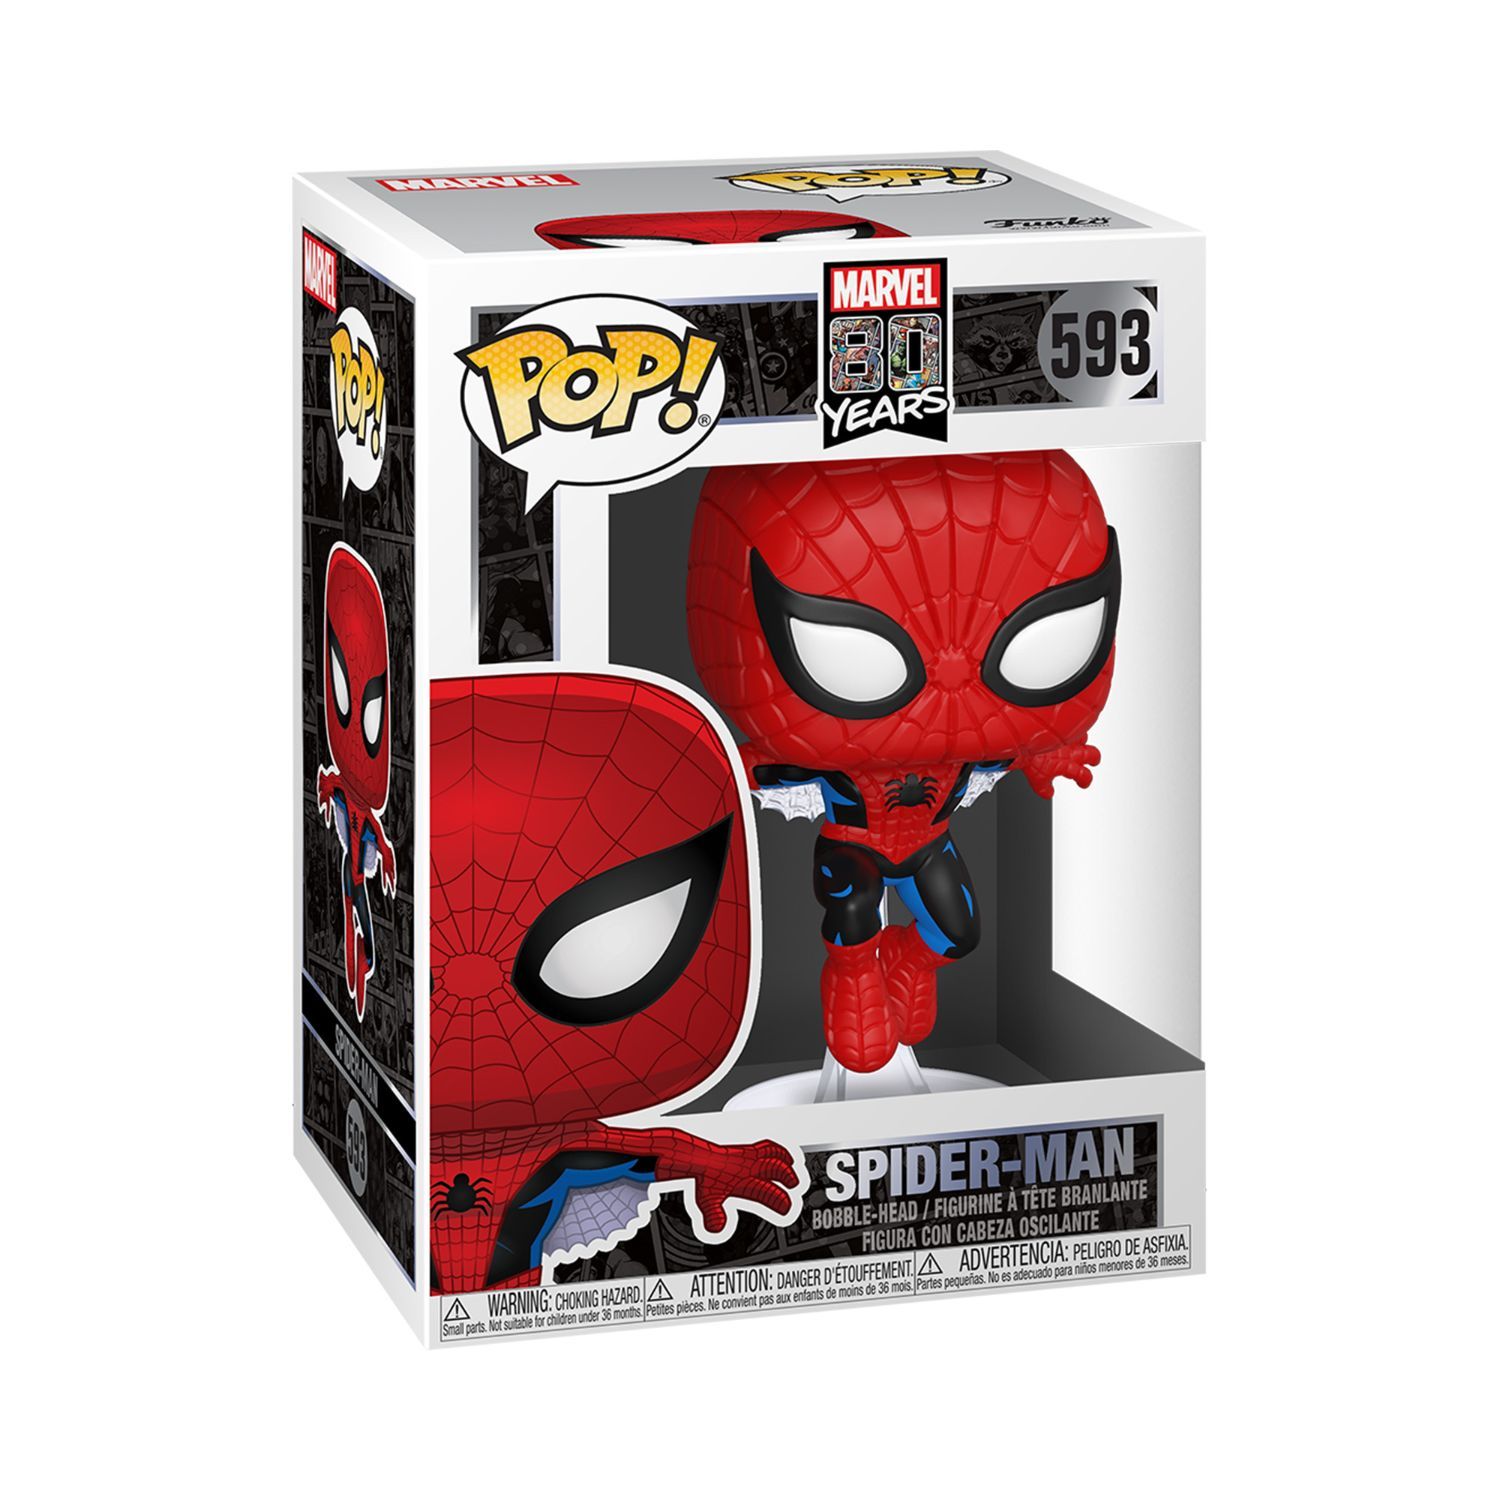 Celebrate 80 years of Marvel with this Pop! of first appearance Spider-Man. He's leaping at the opportunity to join your Marvel Comics collection. Collectible stands 10Cm tall.